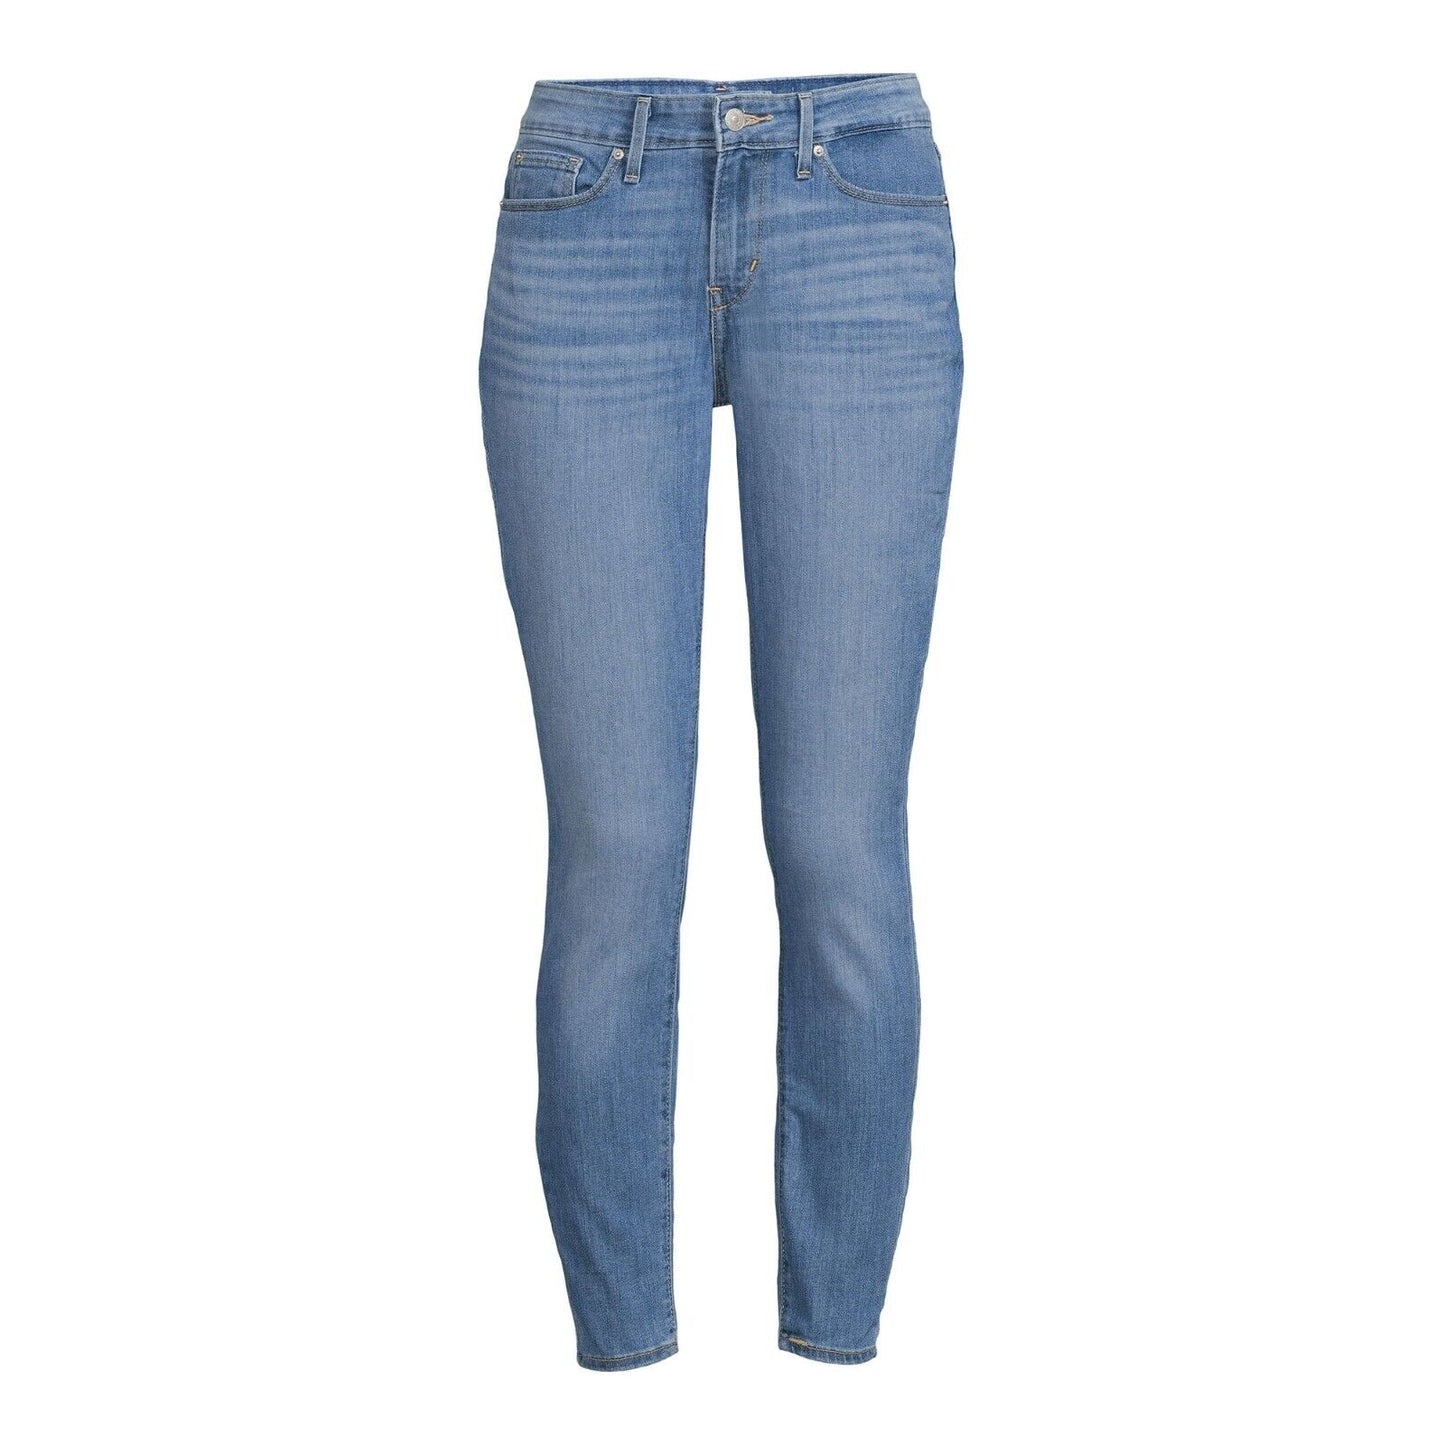 Signature by Levi Strauss & Co. Women's Mid Rise Skinny Jeans